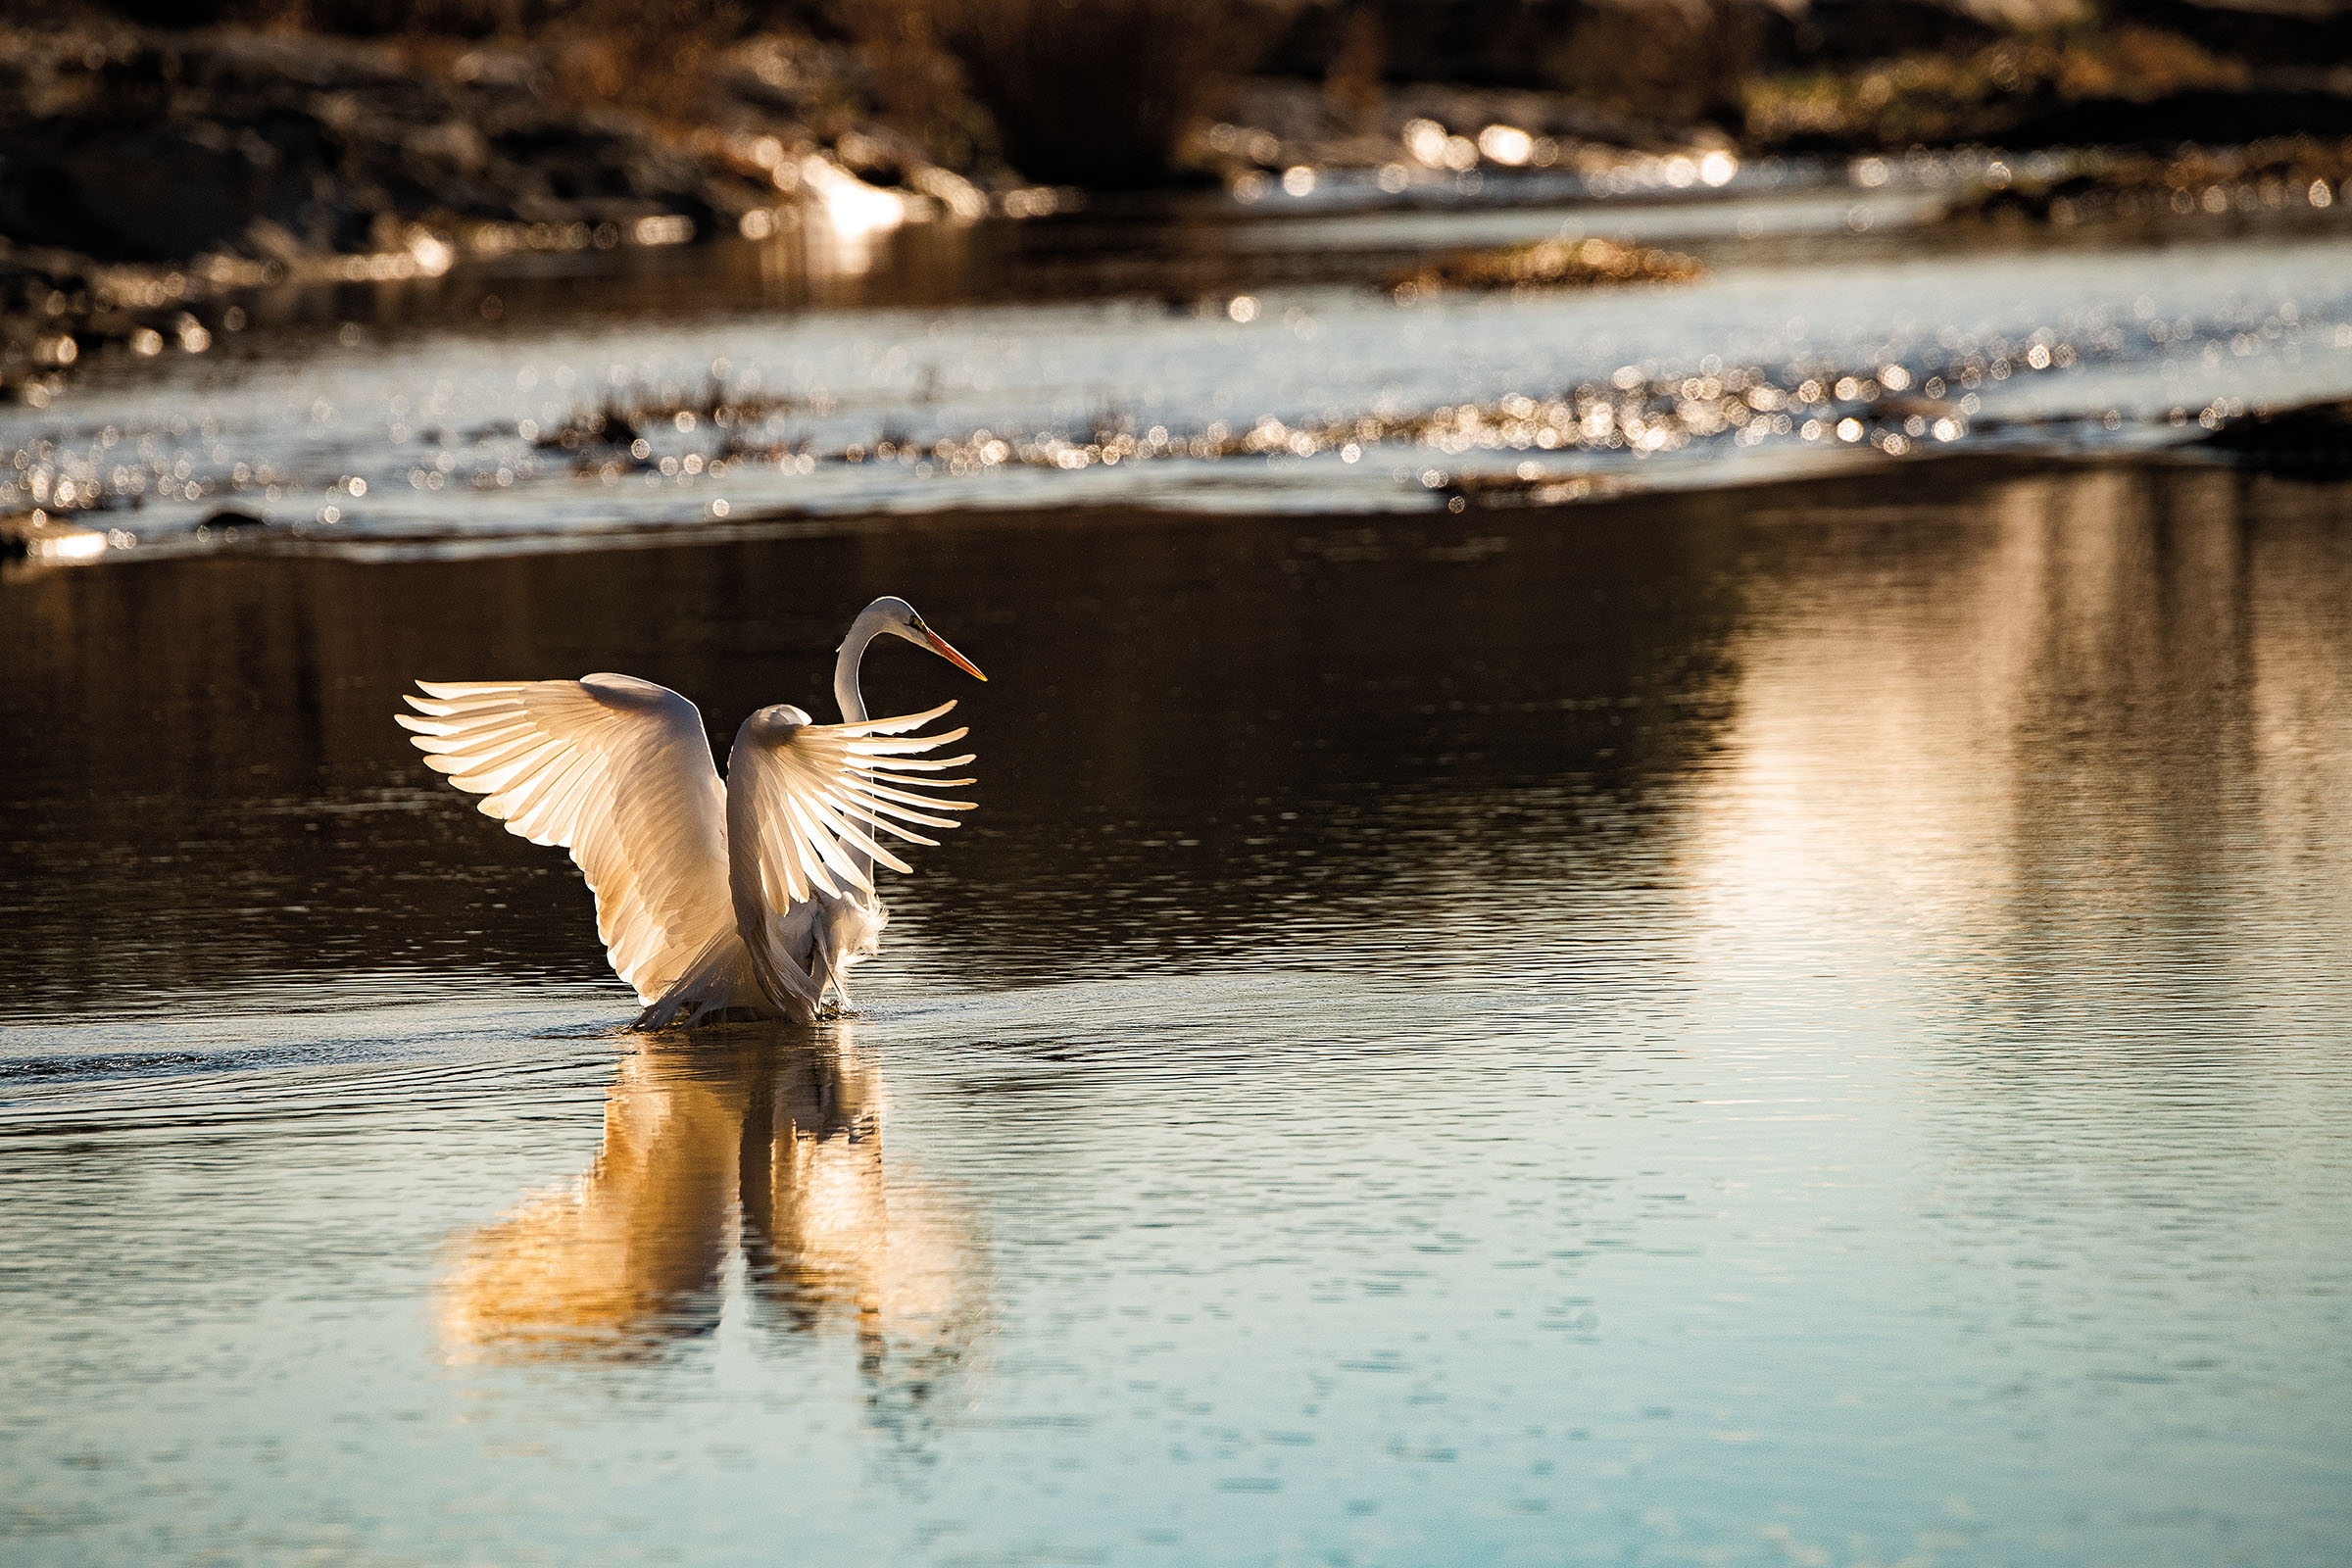 A large white bird spreads its wings on tranquil water